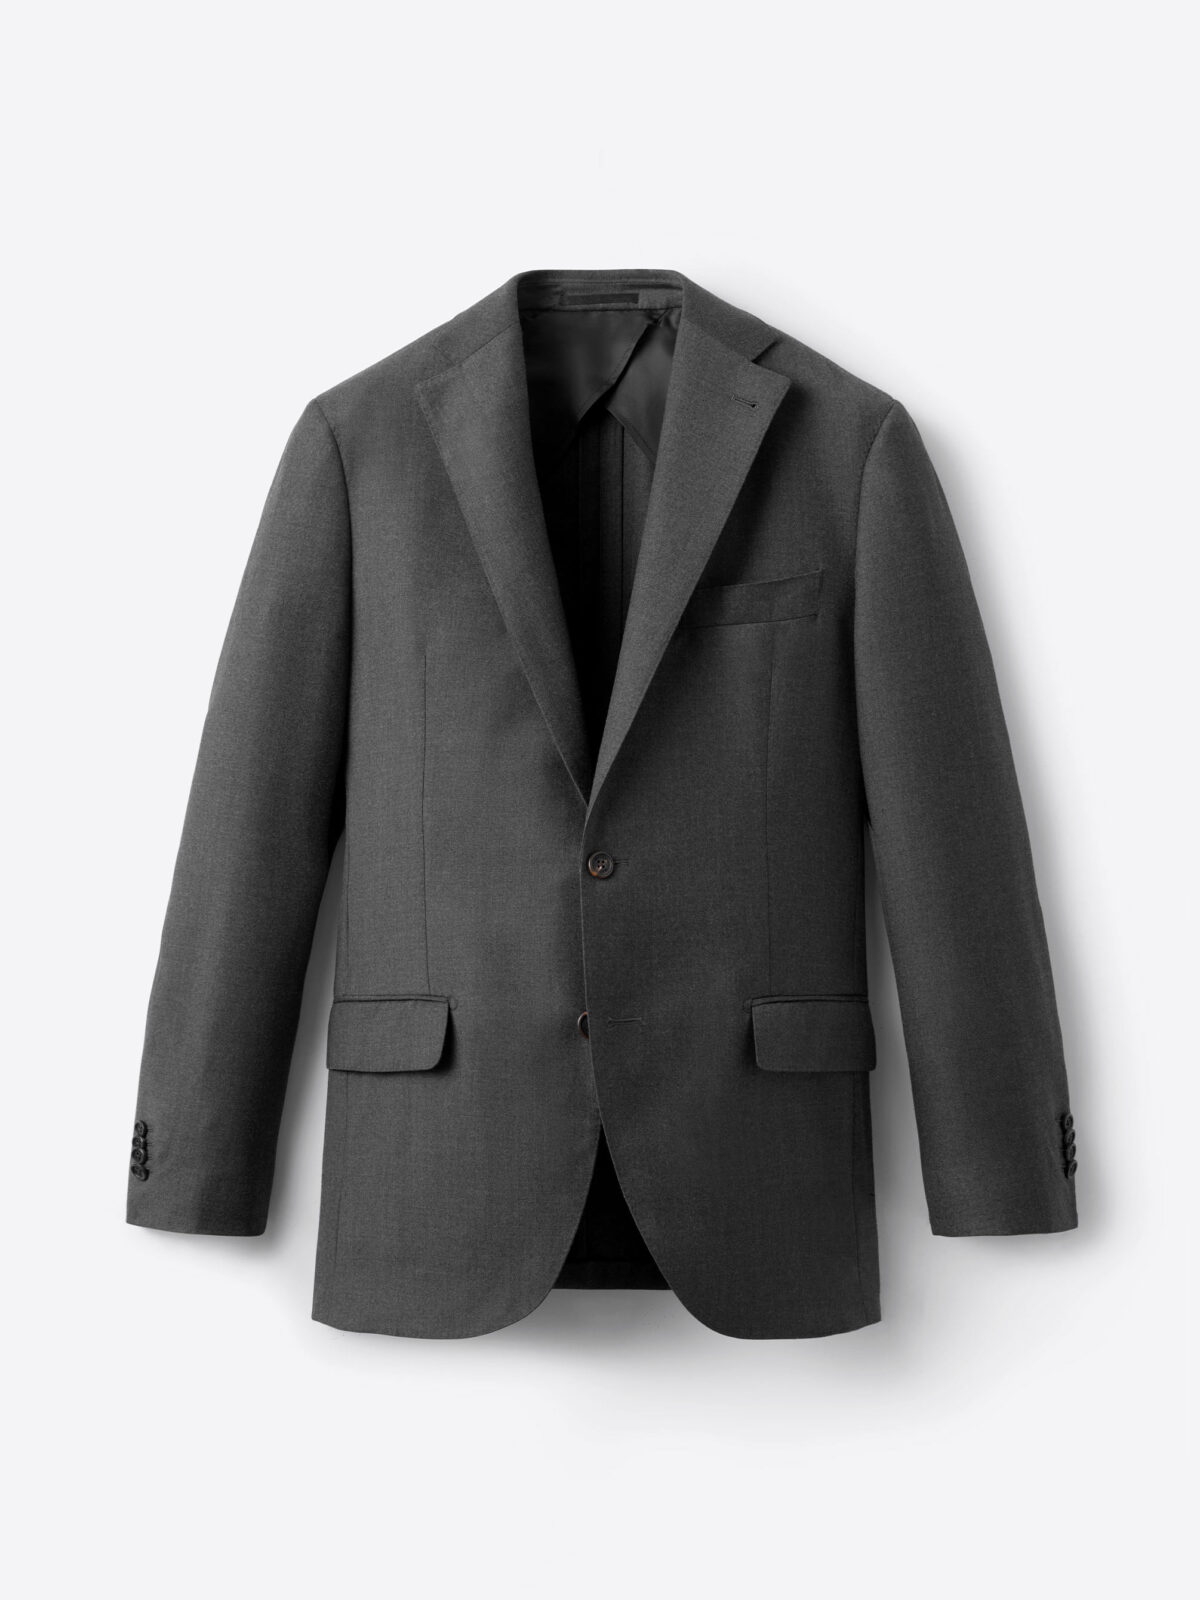 Charcoal Flannel Bedford Suit Jacket - Custom Fit Tailored Clothing